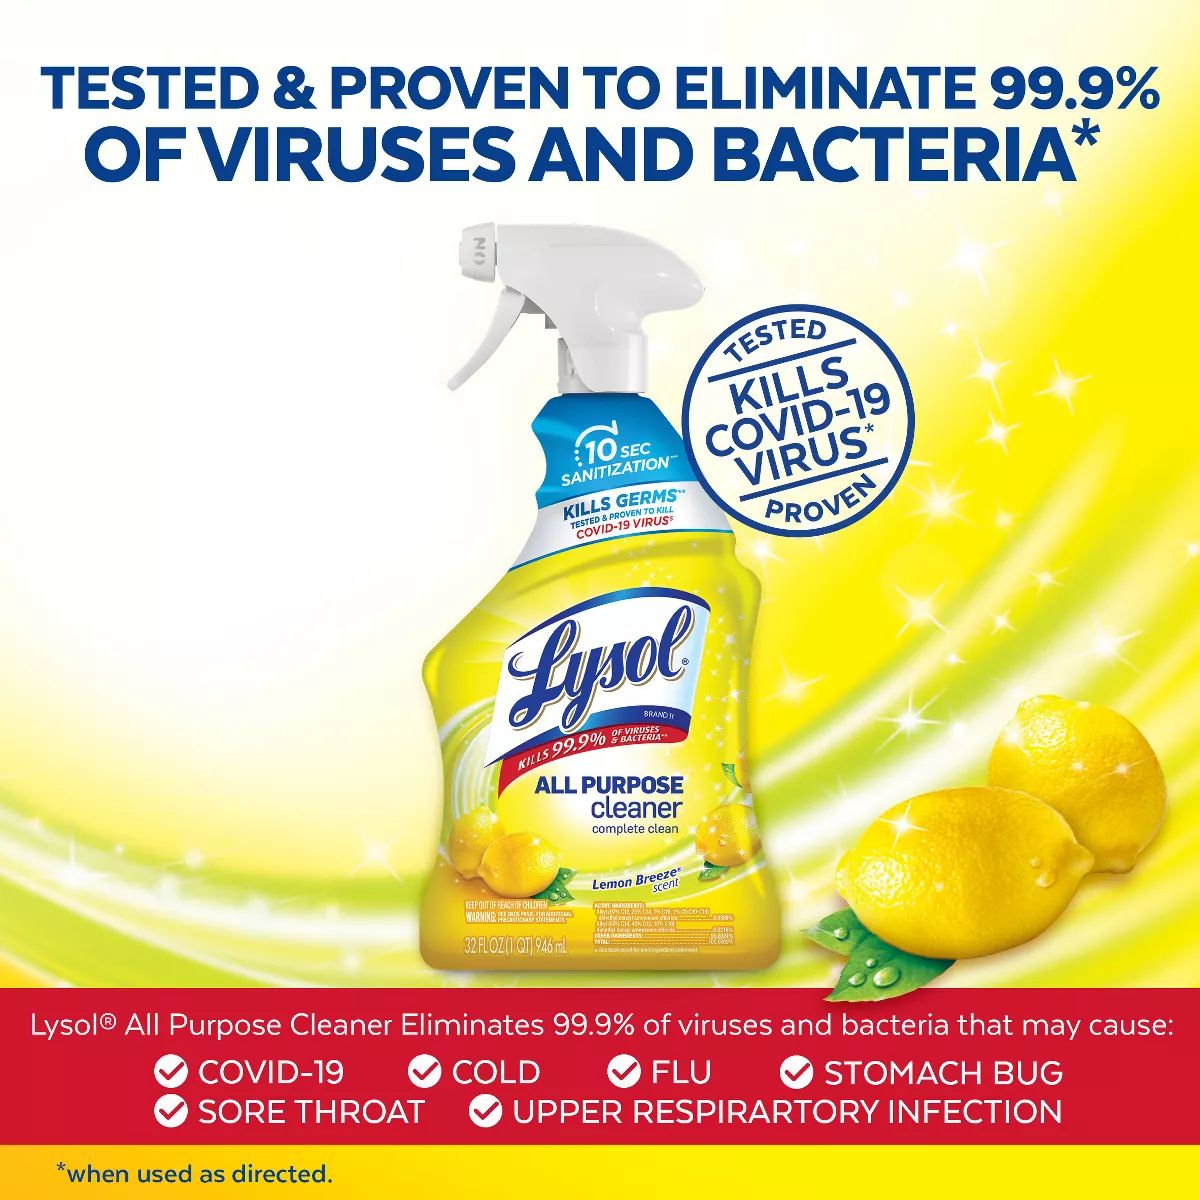 Lysol Lemon Breeze Scented All Purpose Cleaner & Disinfectant Spray - 32oz | Target